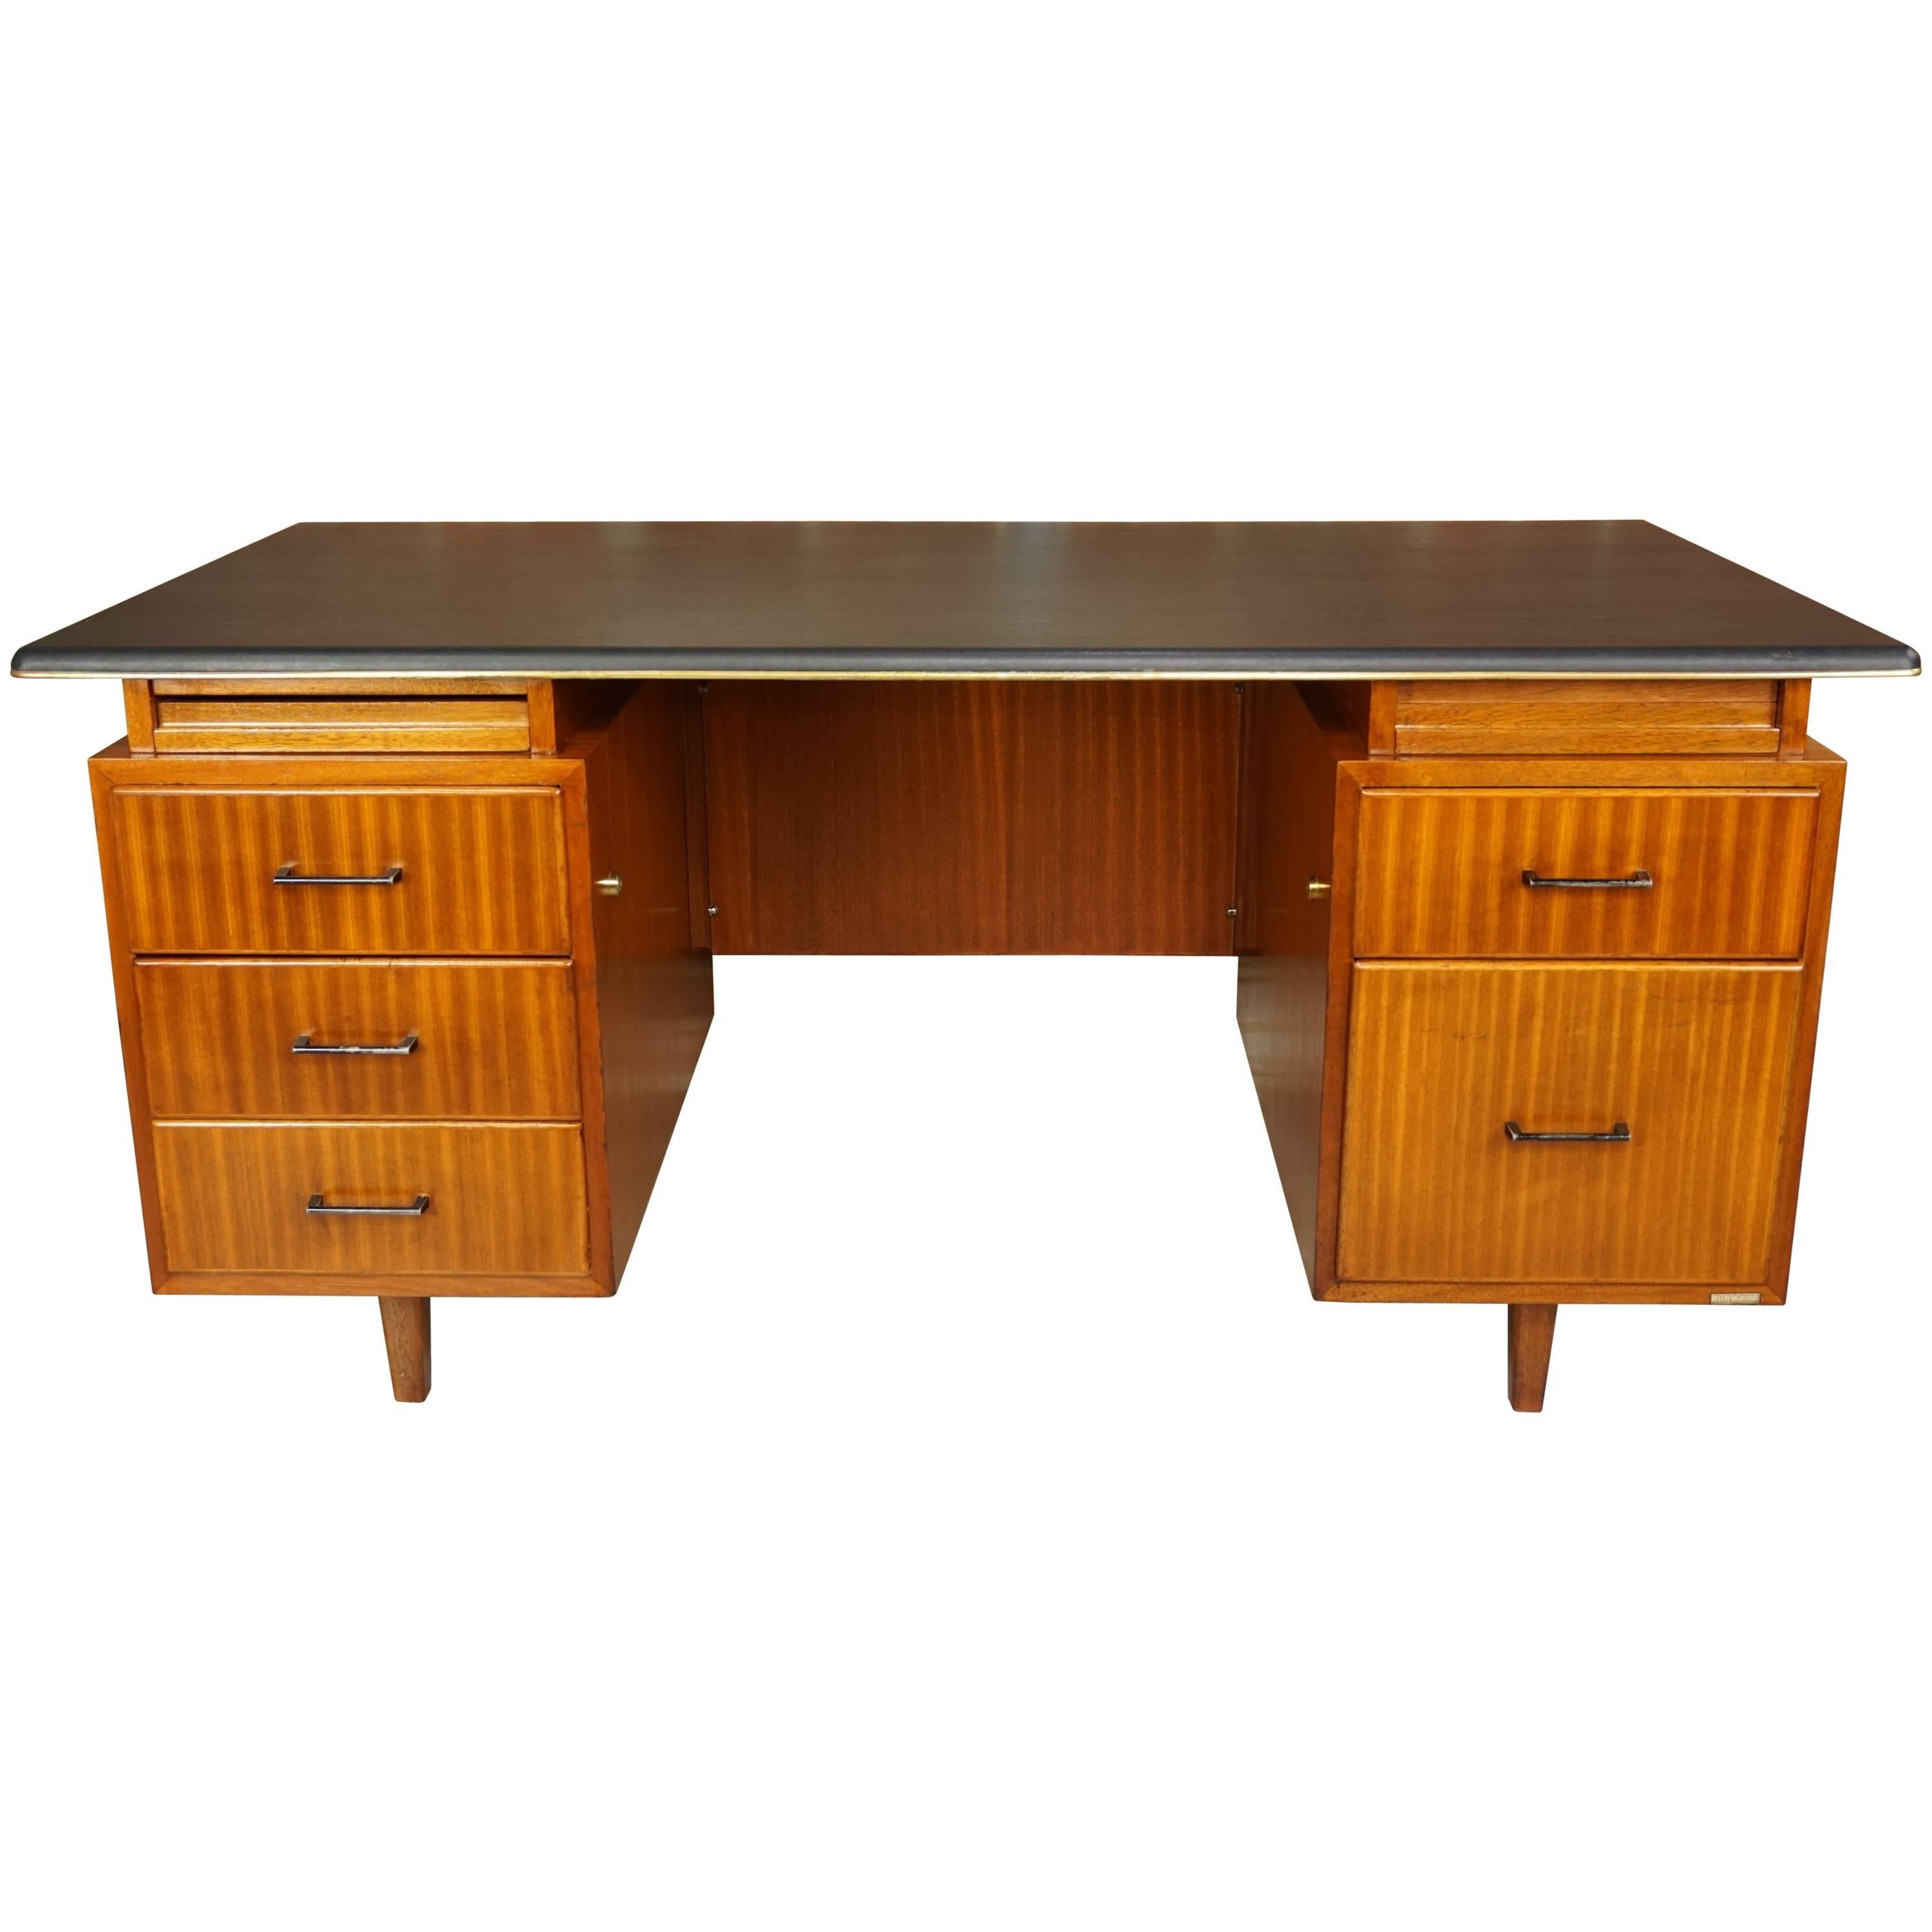 French Design Teak Wooden and Black Executive Desk from the 1950s by Burwood